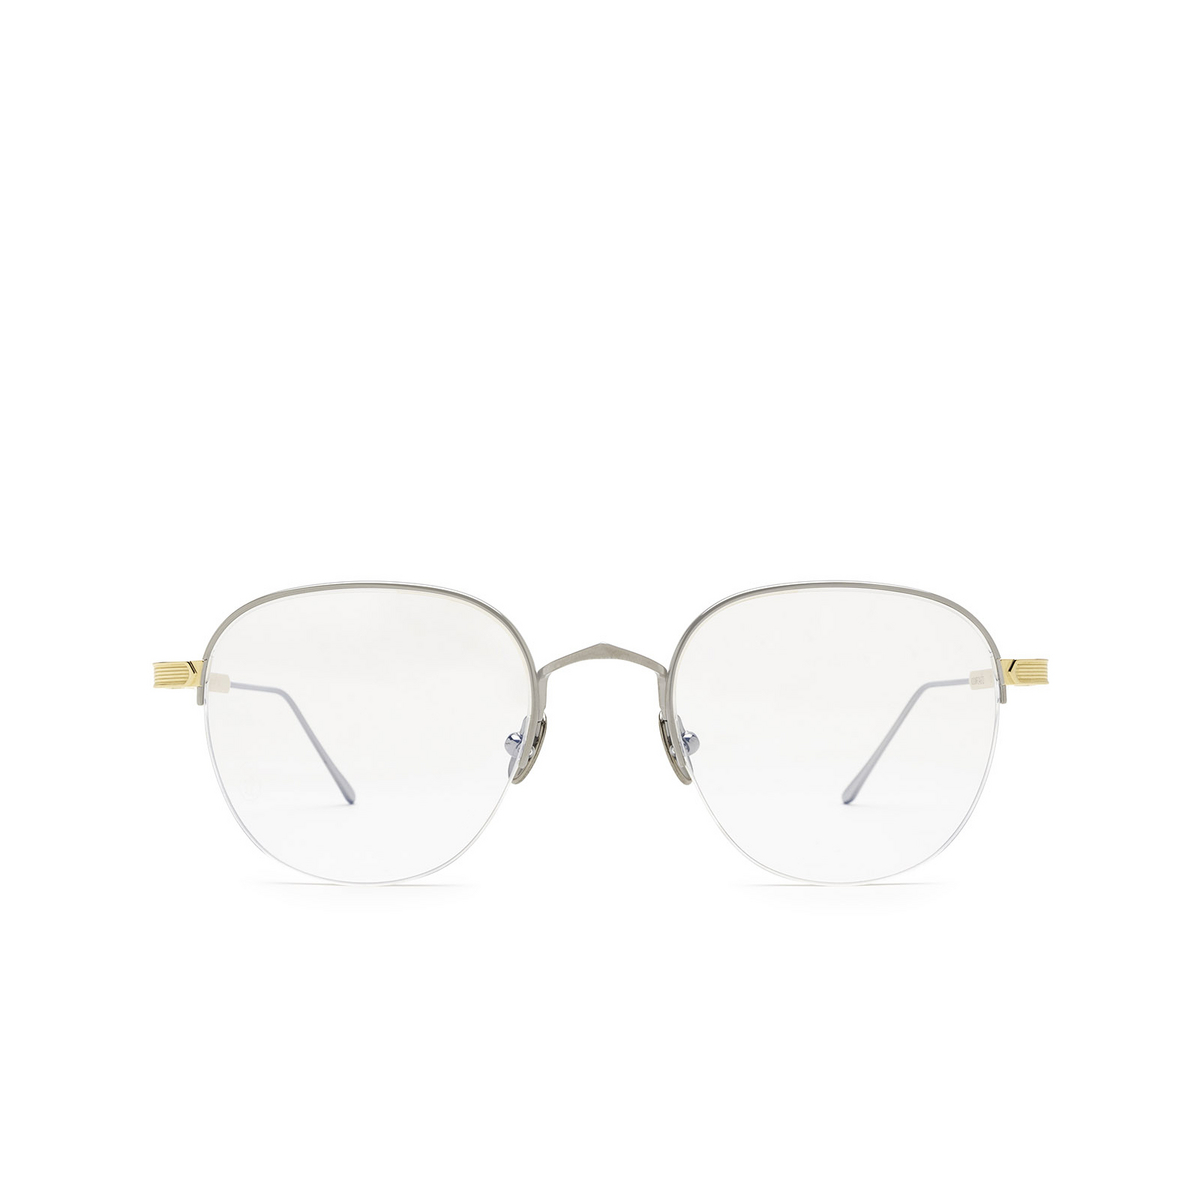 Cartier® Round Eyeglasses: CT0164O color 003 Ruthenium & Gold - front view